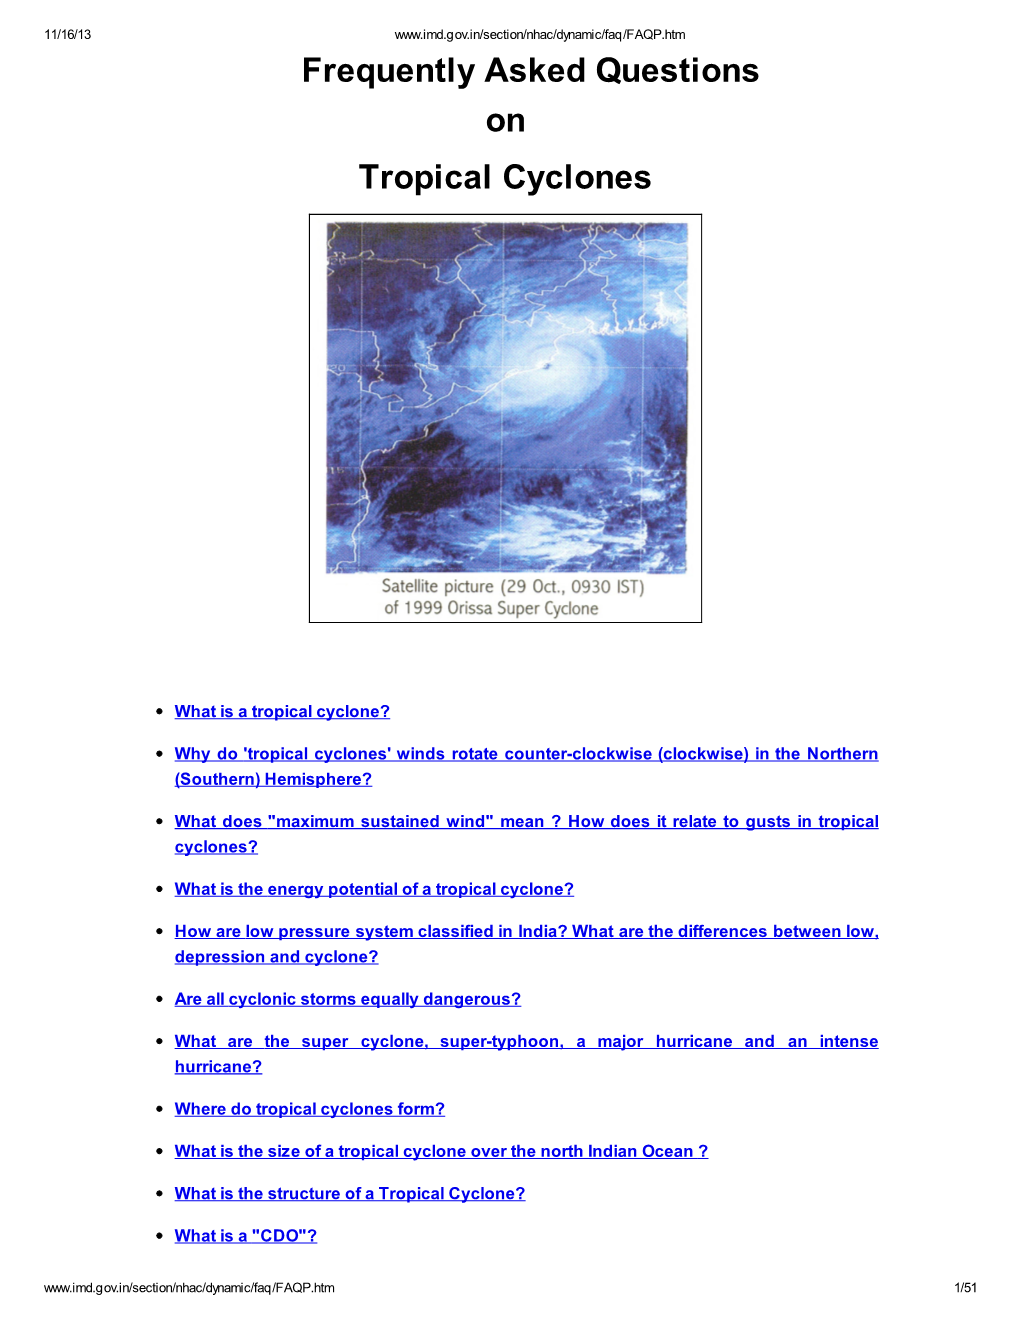 Frequently Asked Questions on Tropical Cyclones